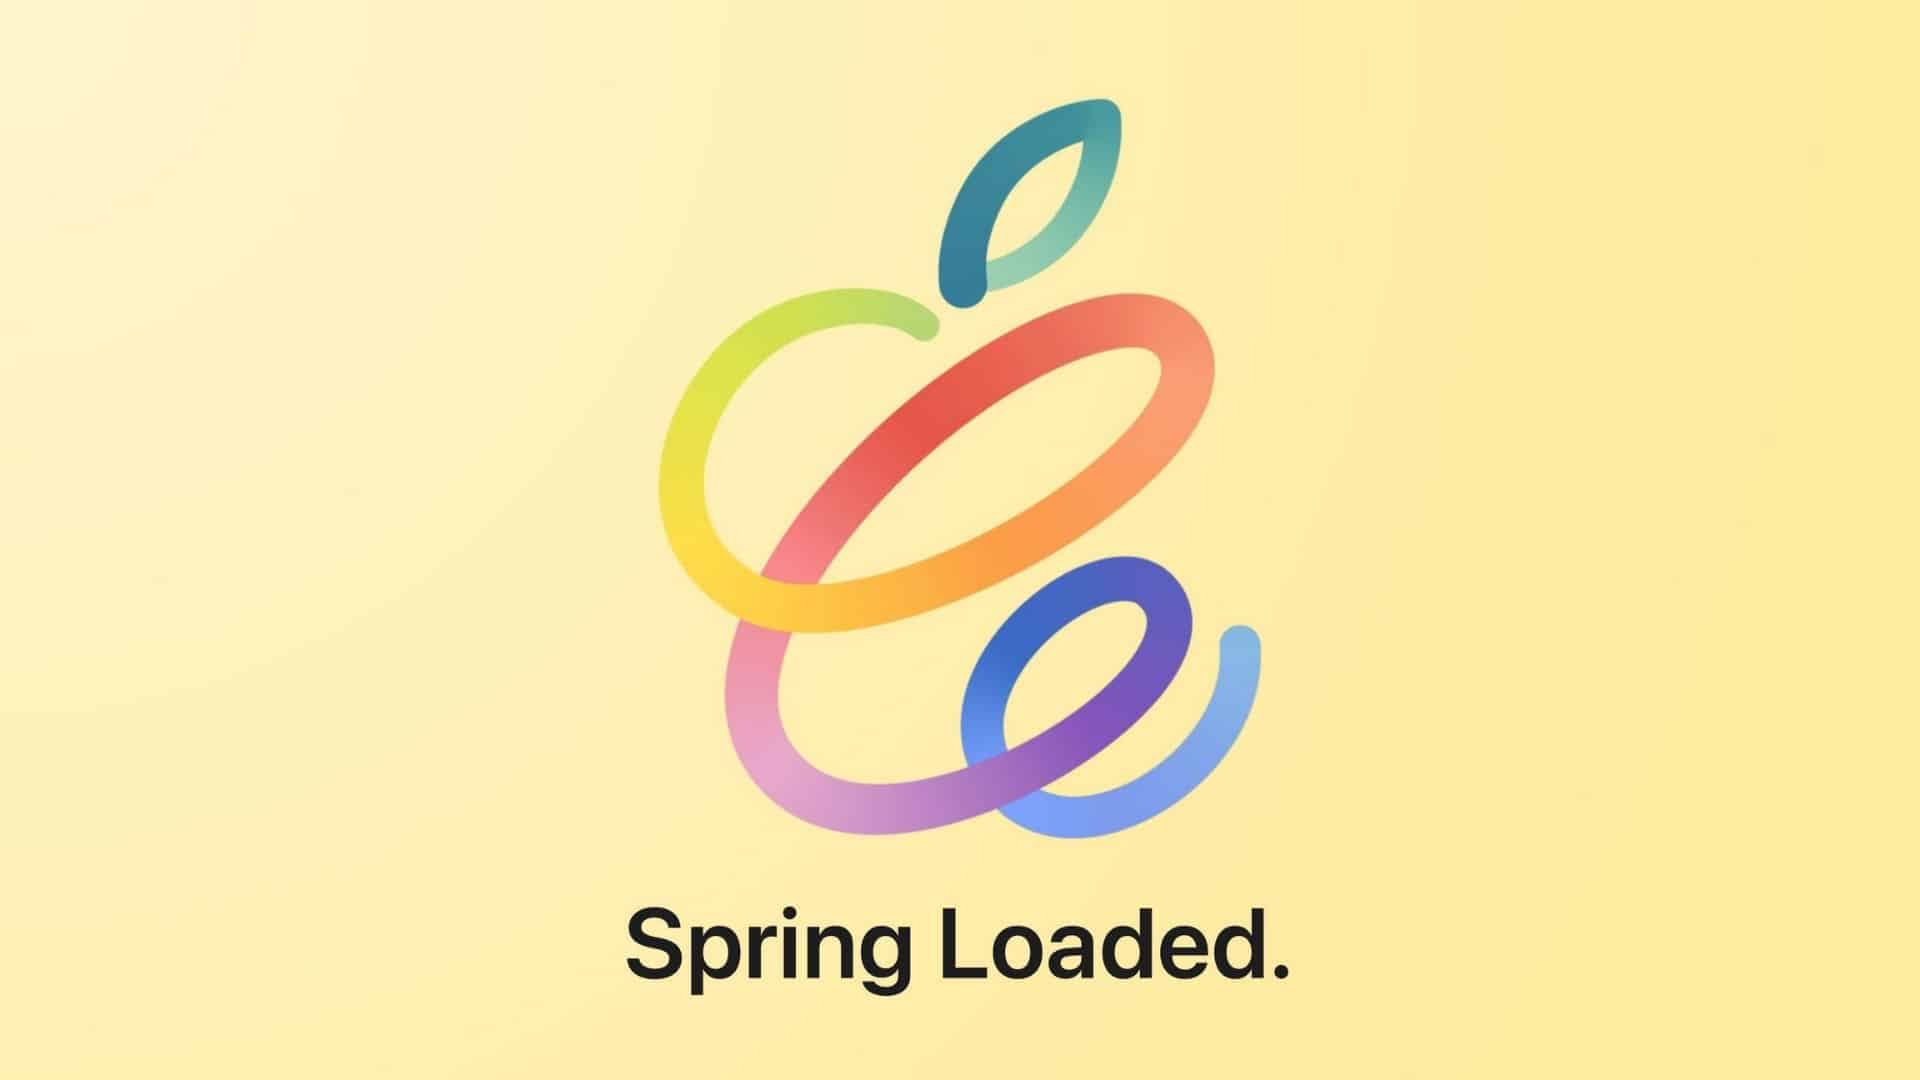 Apple Spring Loaded event logo and graphic